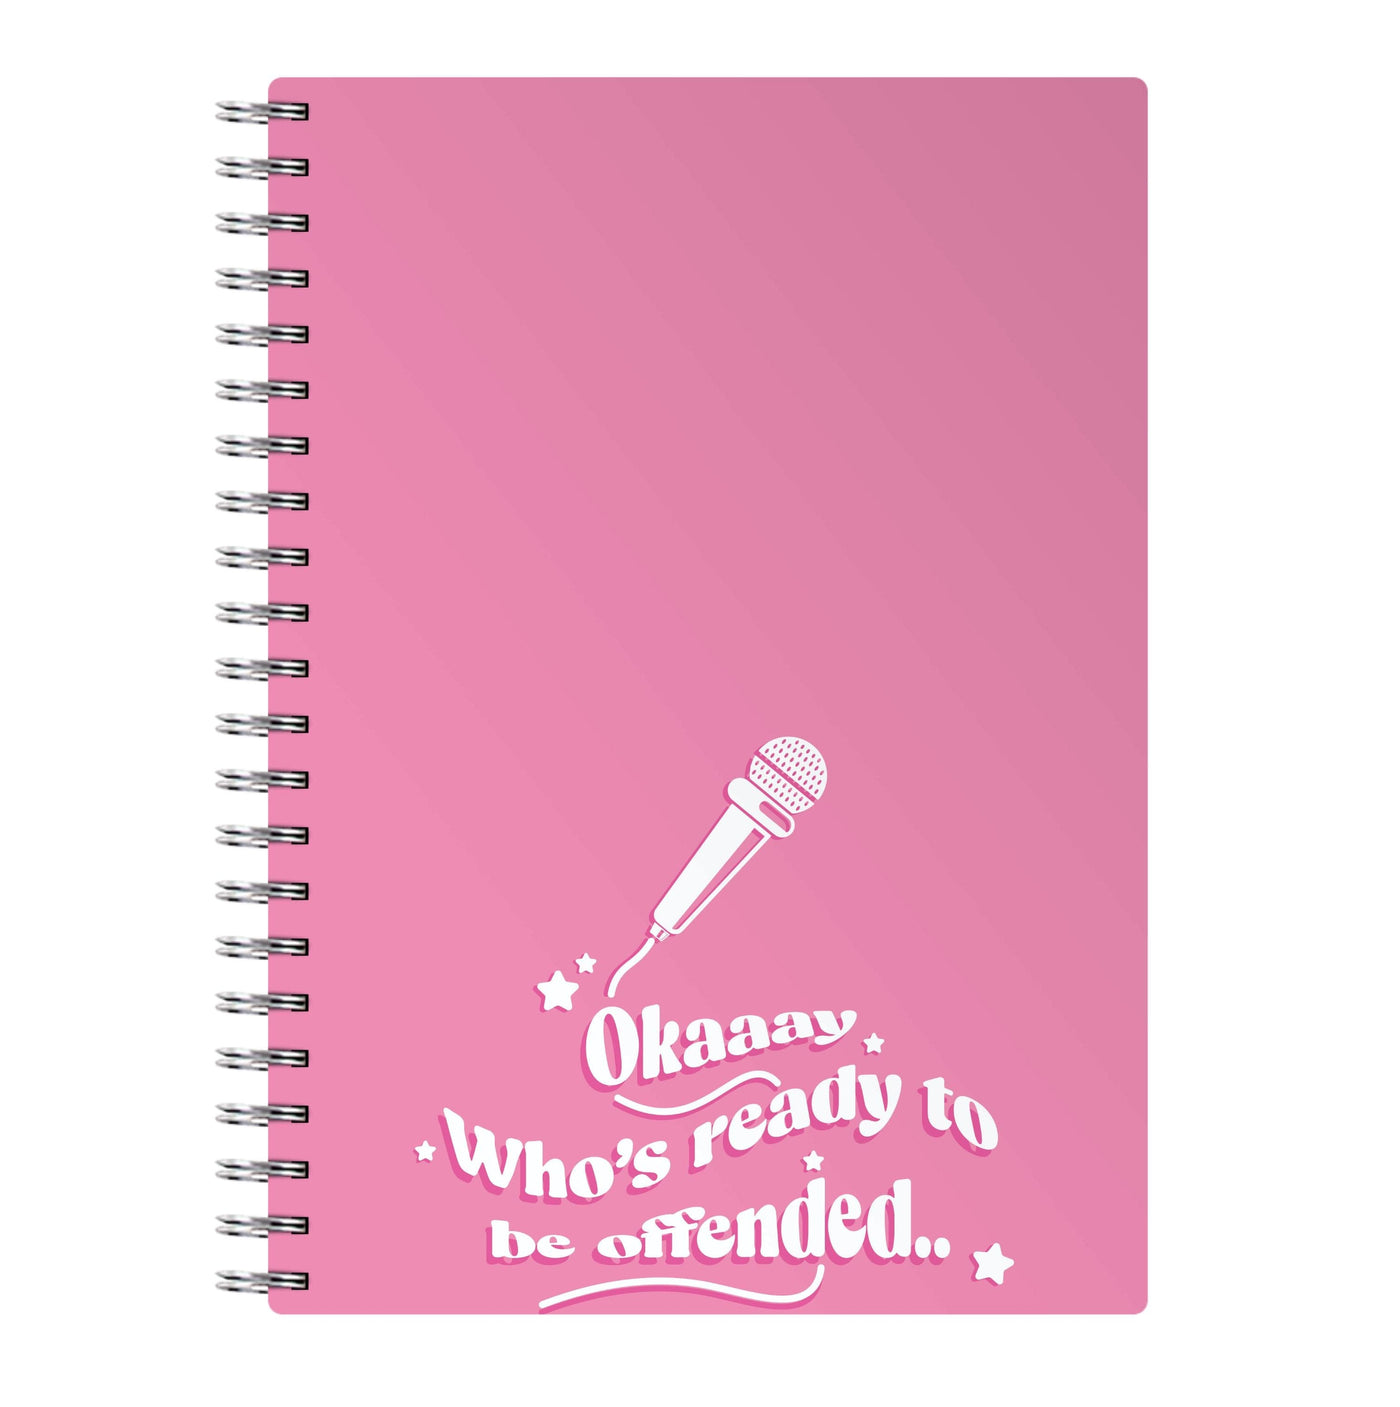 Who's Ready To Be Offended - Matt Rife Notebook